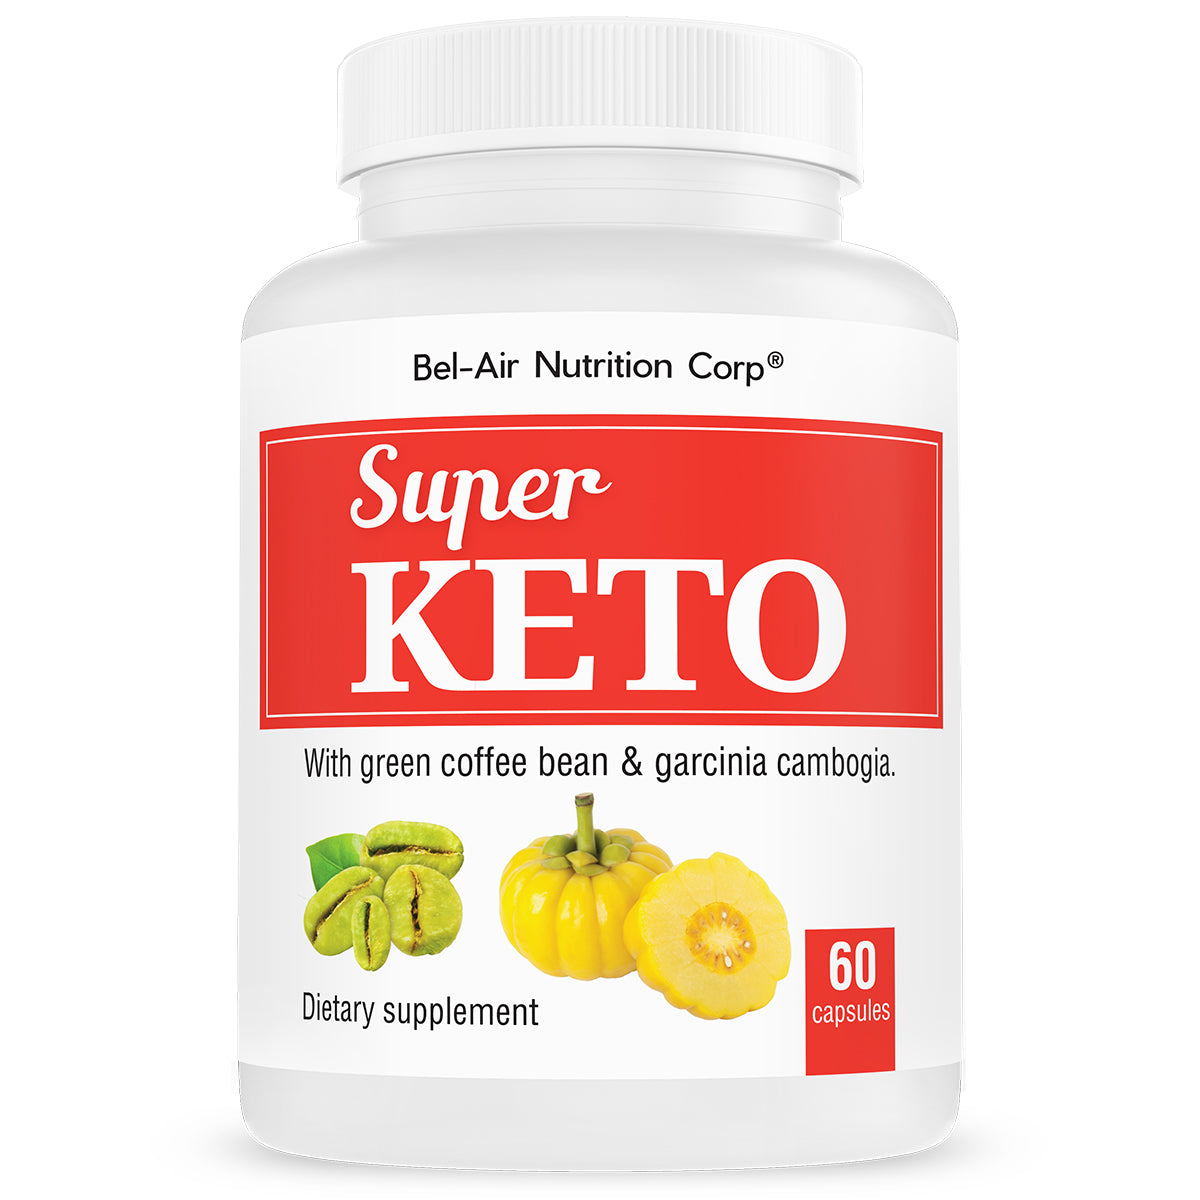 keto diet, ketosis, best weight loss supplements, weight loss supplements